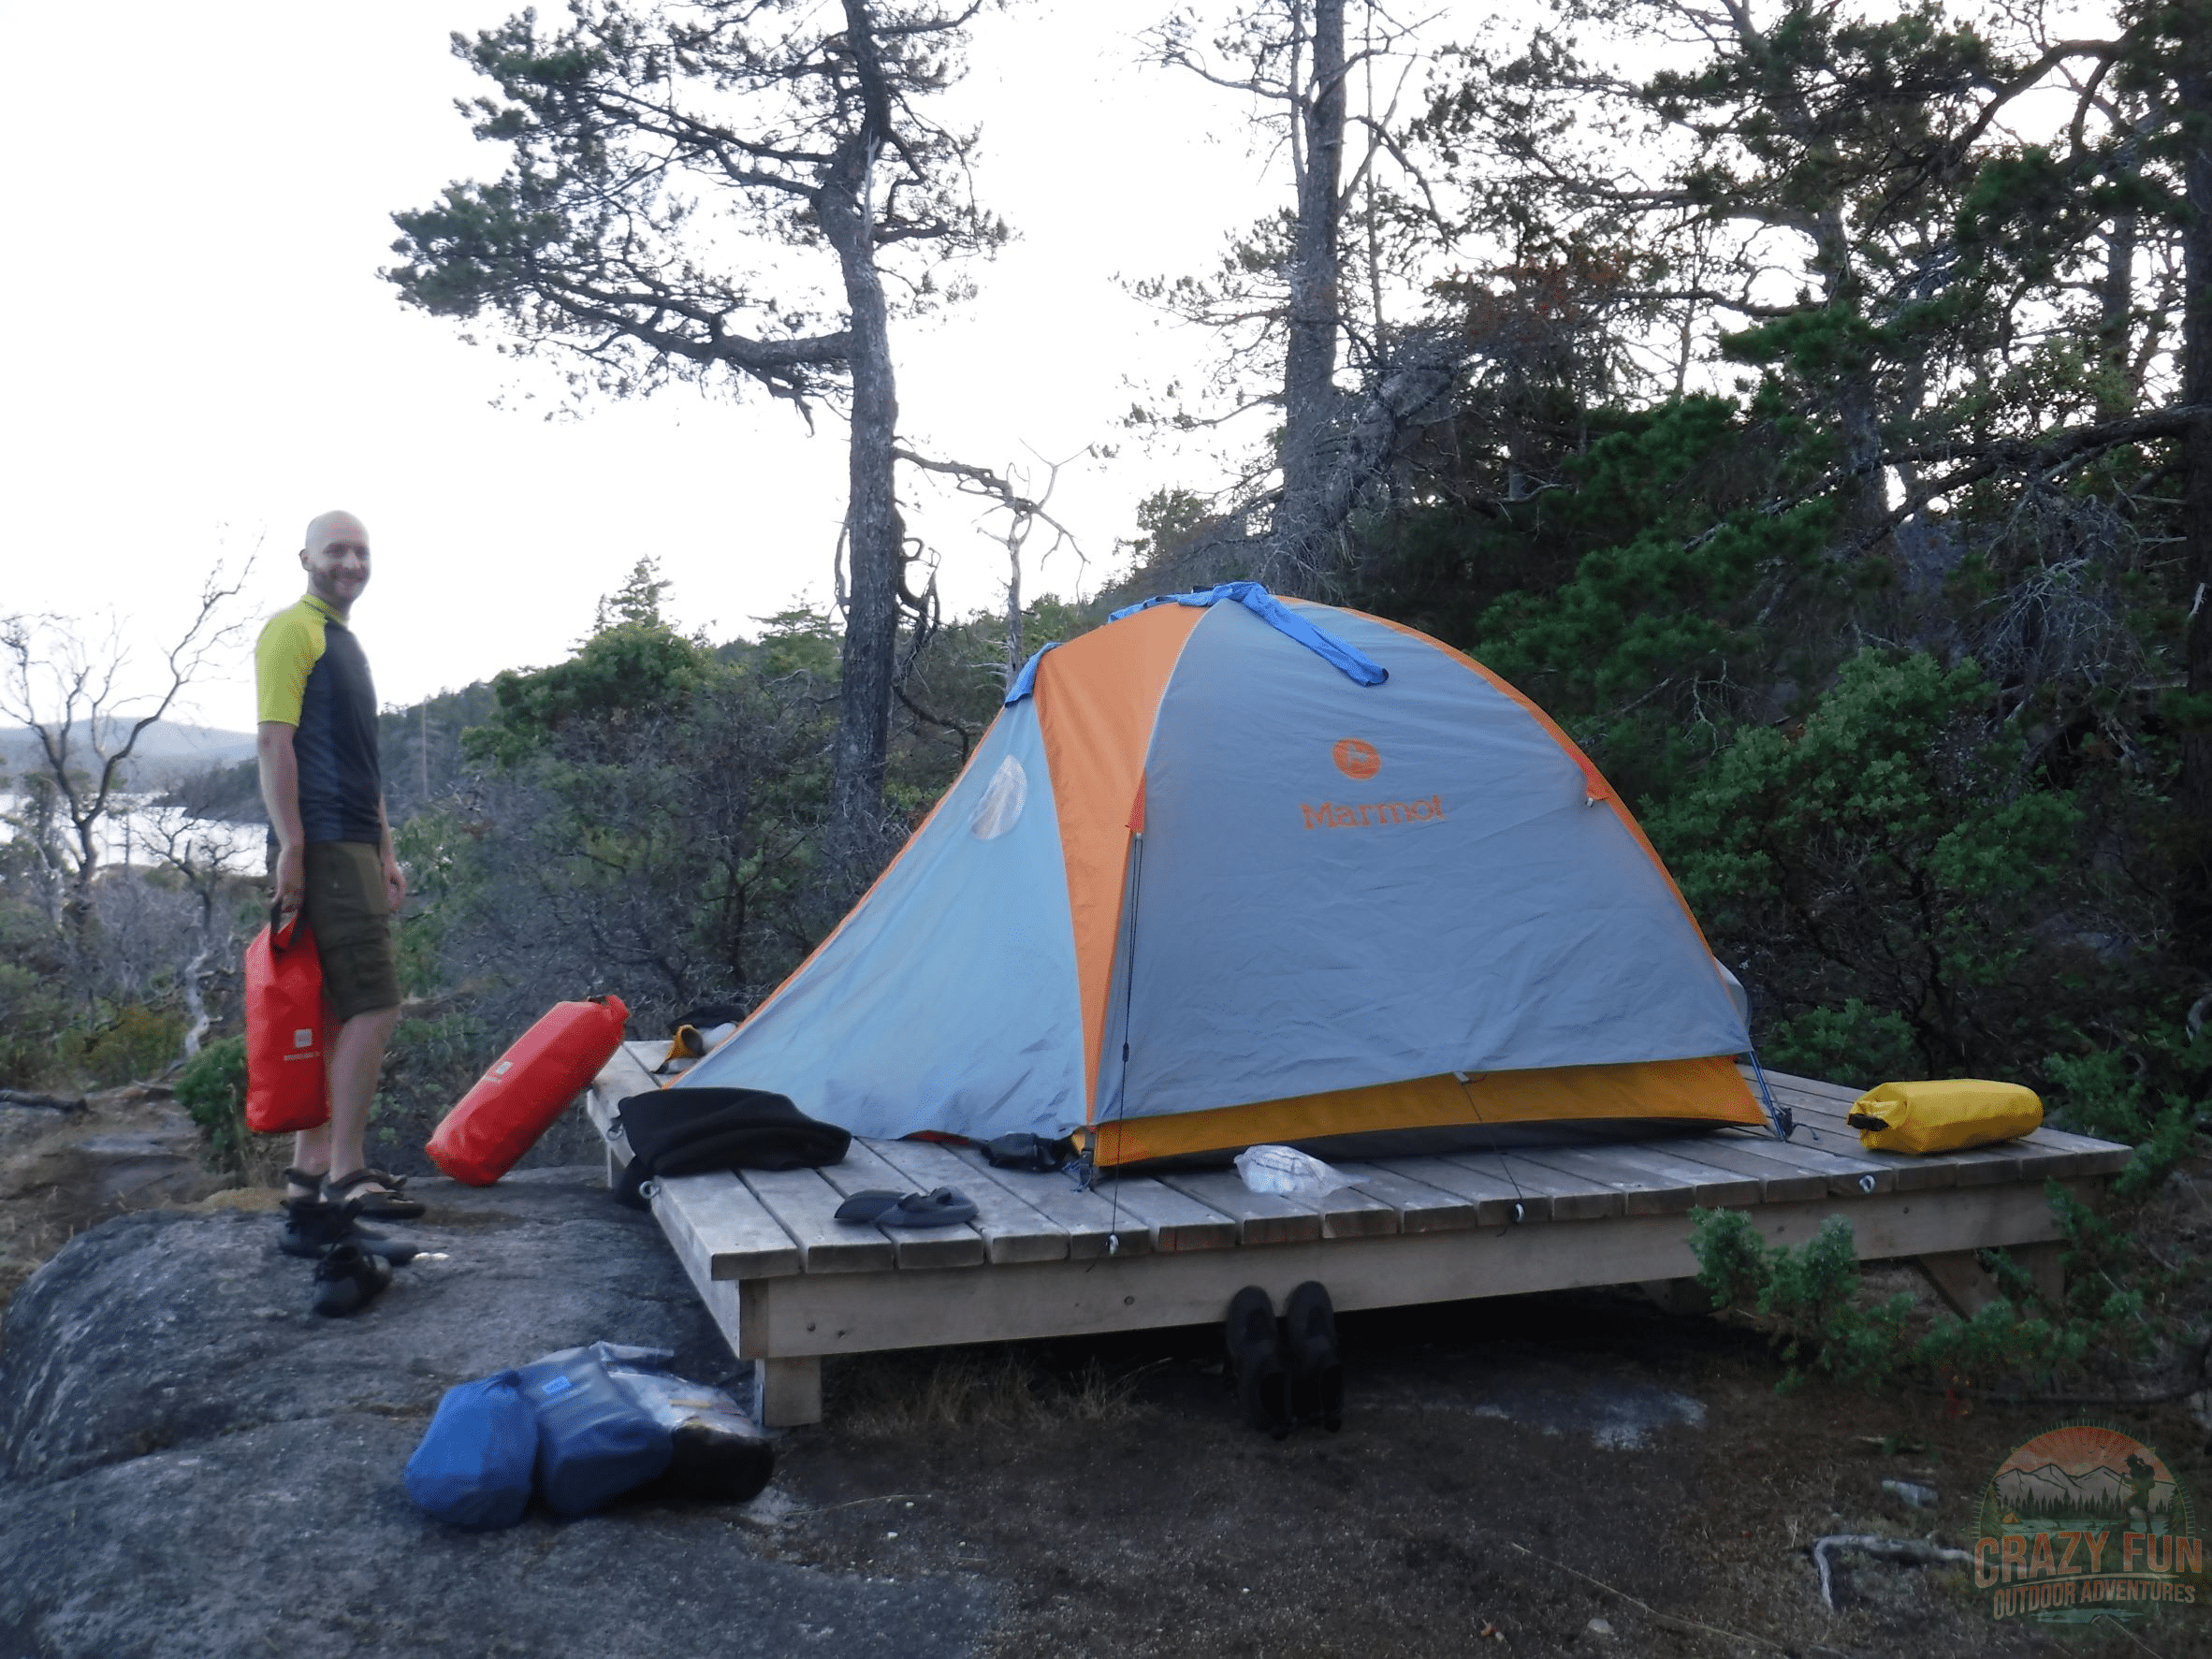 Get better at kayaking by doing an overnight trip. Kris is holding a red dry bag in front of our tent.